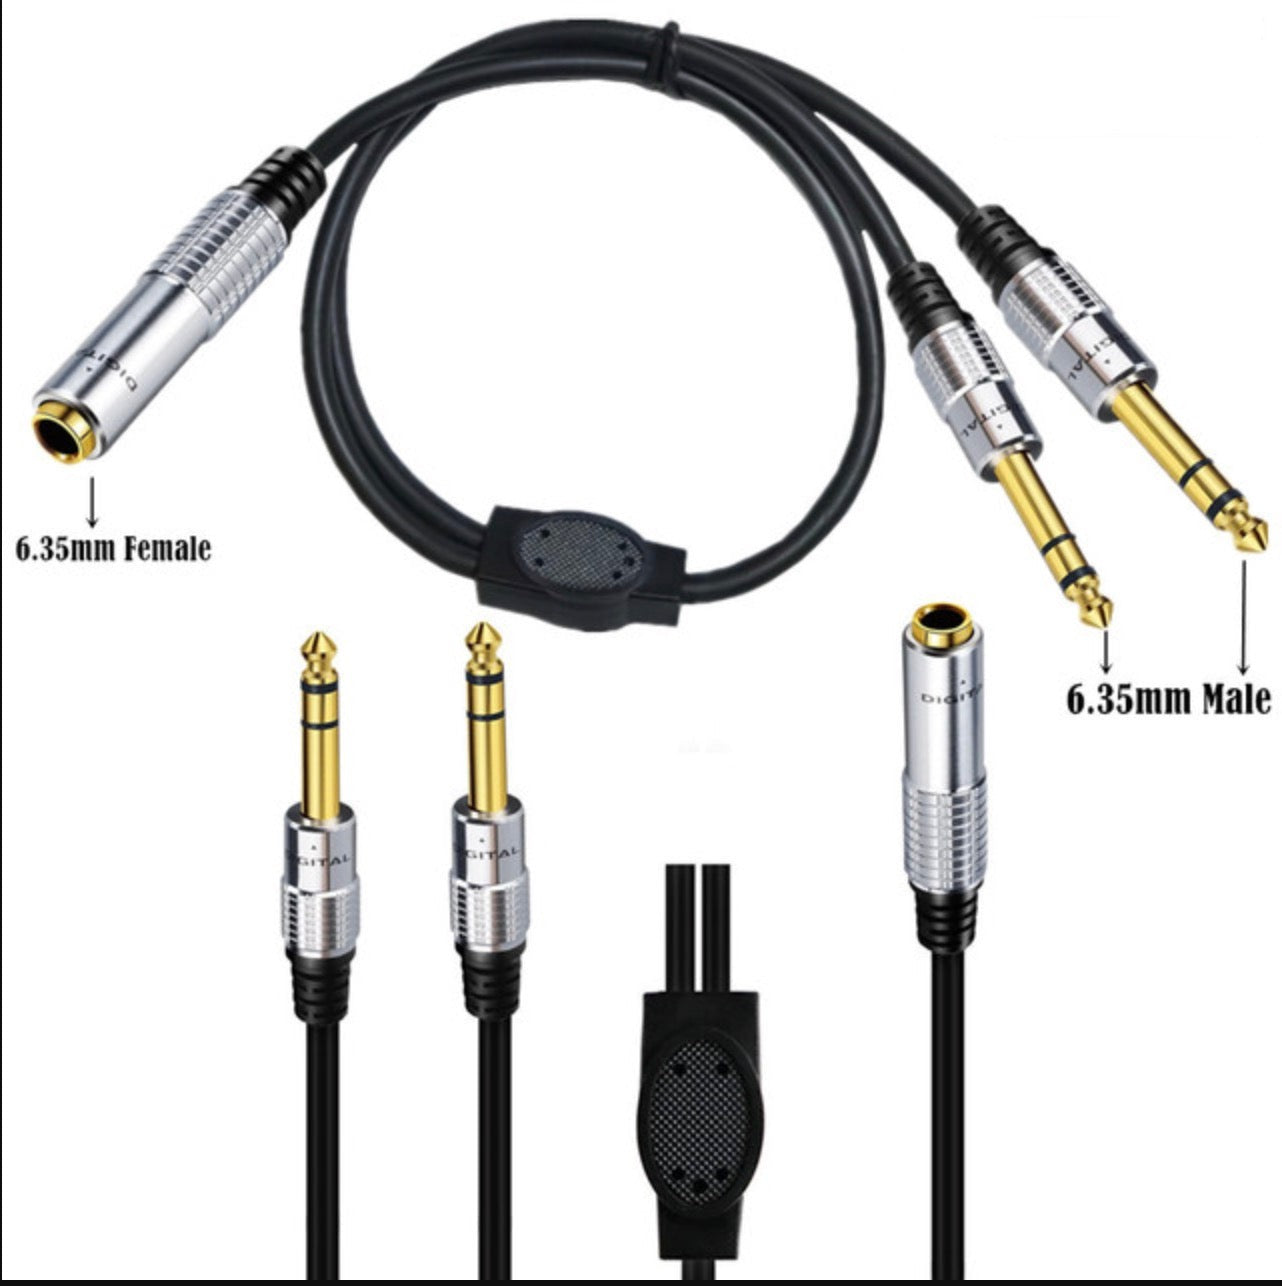 6.35mm 1/4 inch TRS Female to Dual 6.35mm Male Splitter Audio Stereo Cable 0.5m